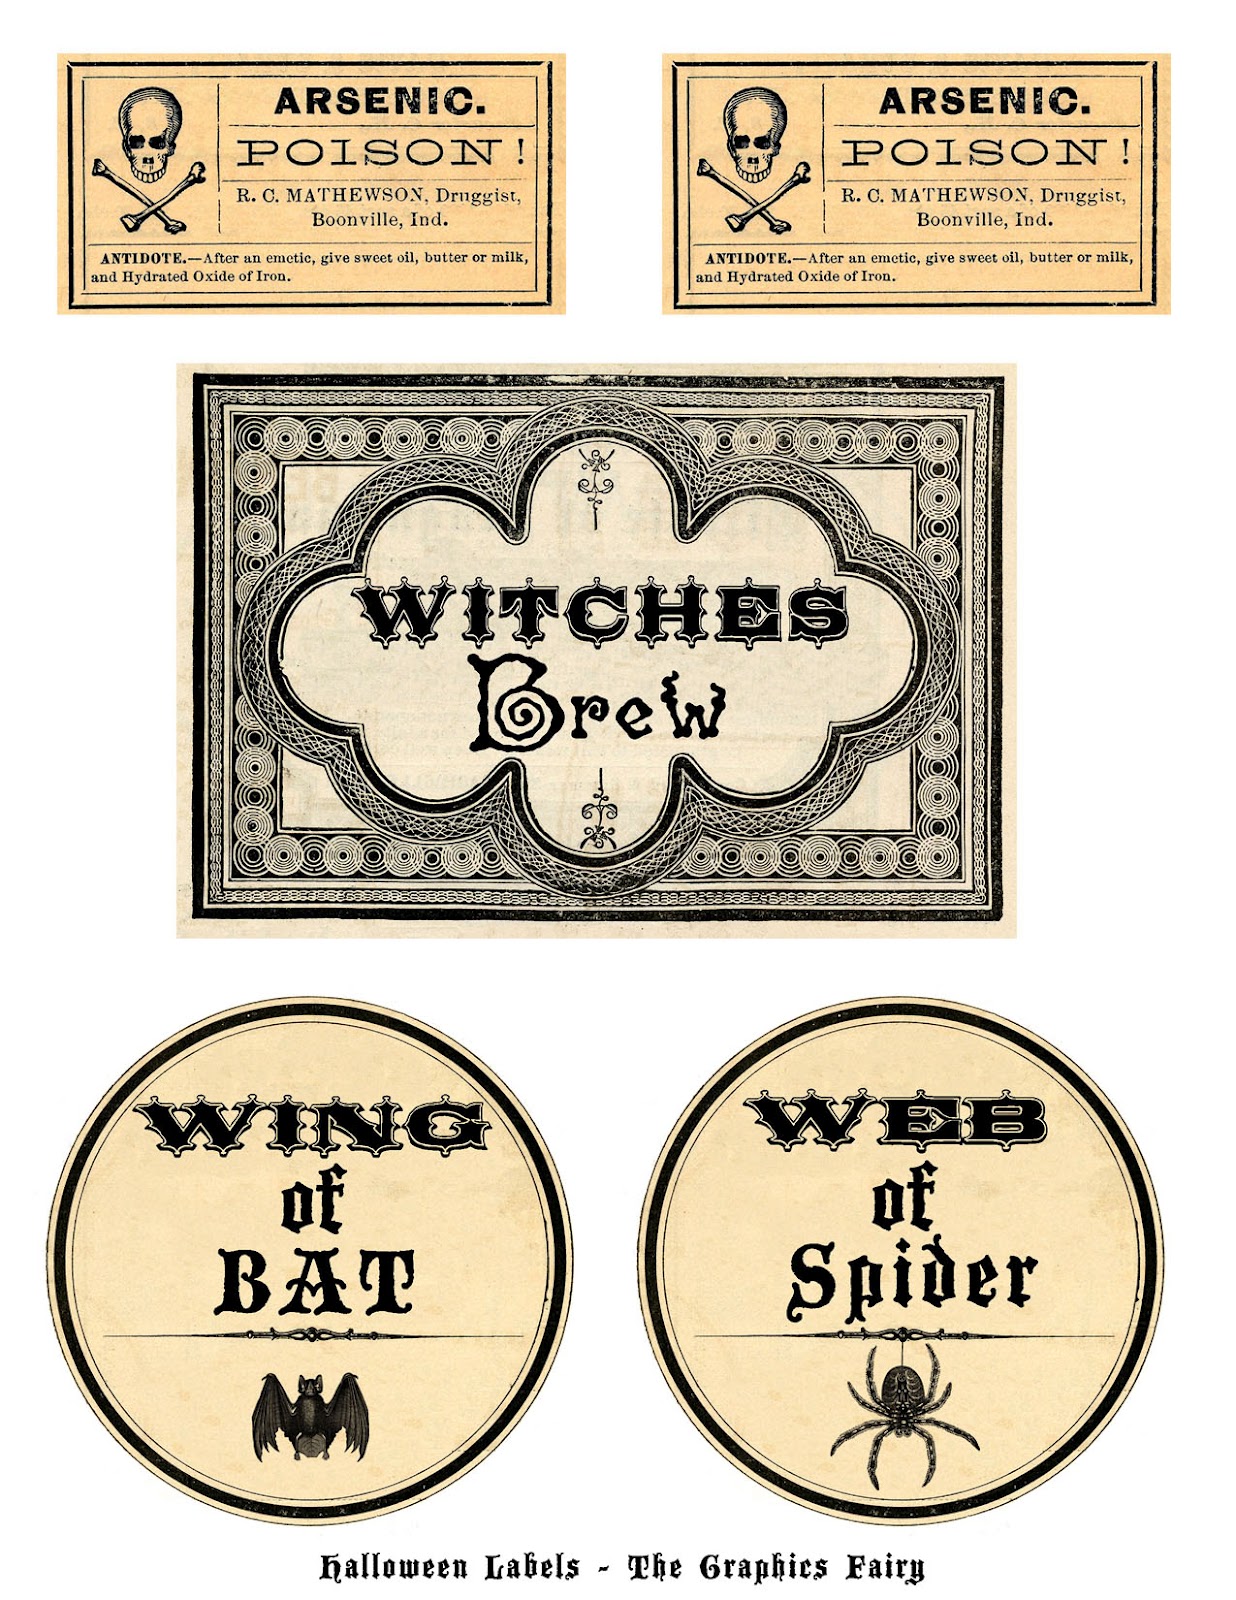 papercraft-apothecary-jar-labels-tags-ideas-page-5-halloween-forum